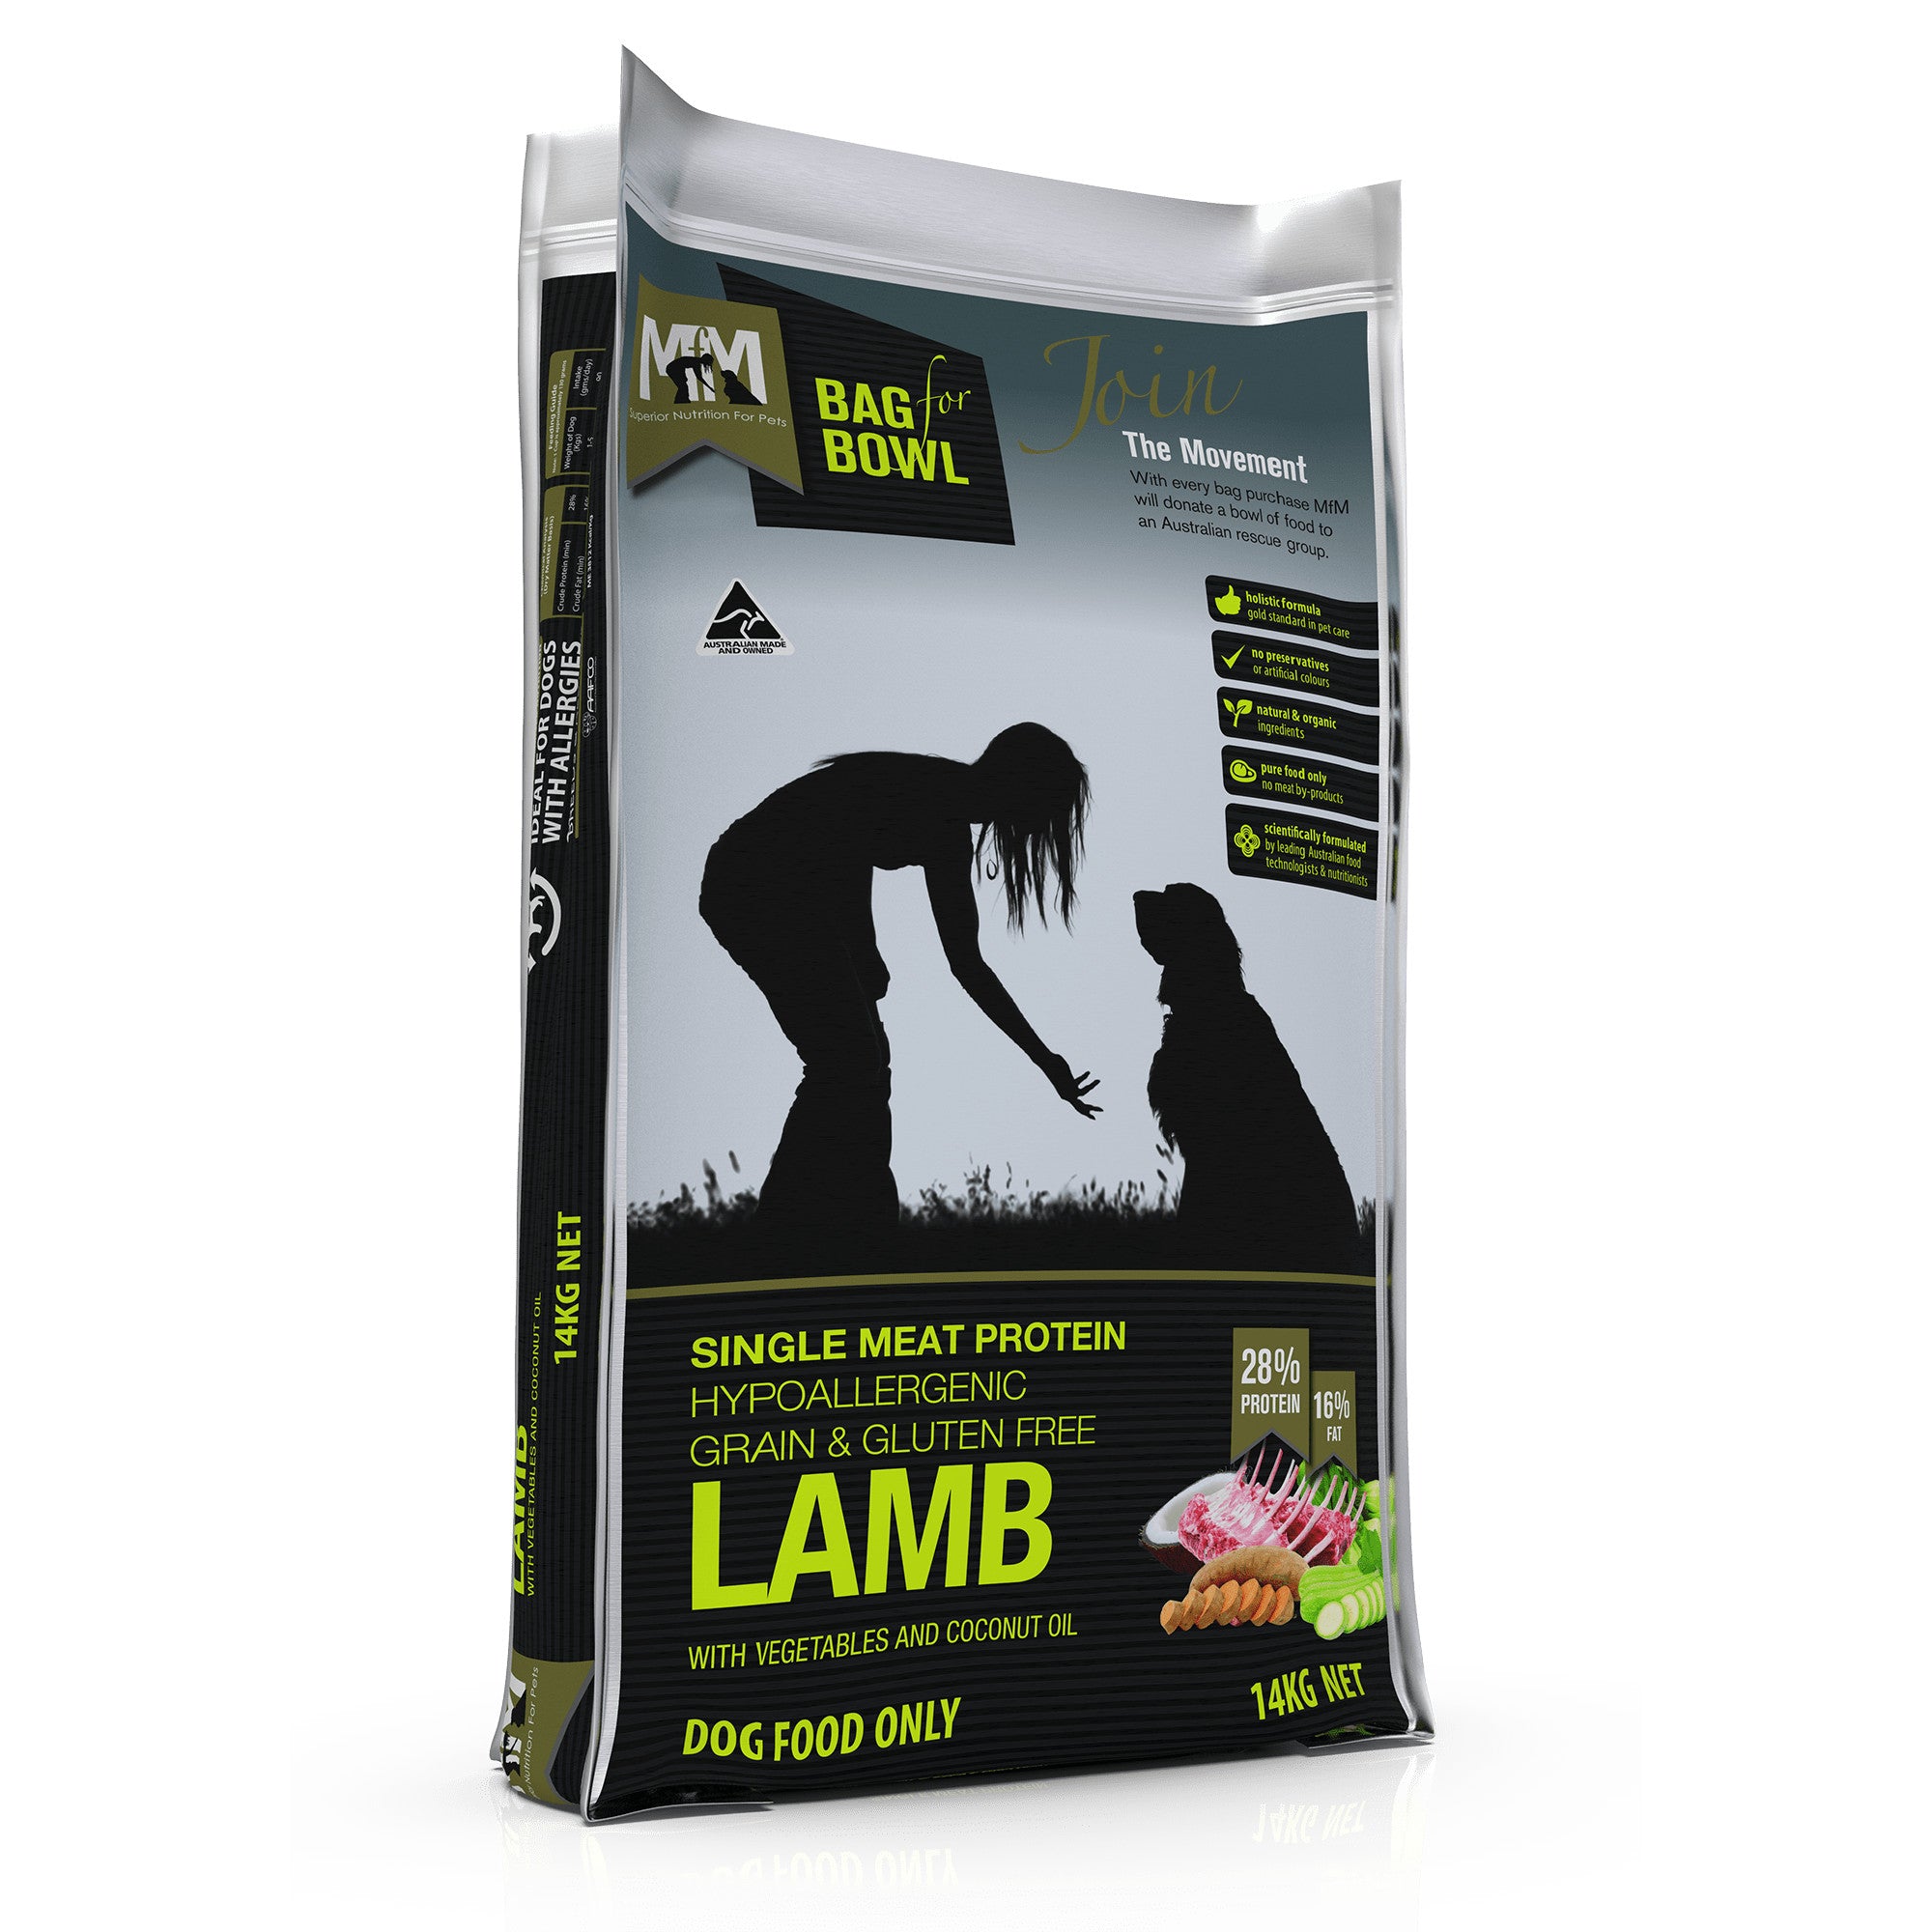 Meals for Mutts Lamb Single Meat Protein Dog Food 14kg.